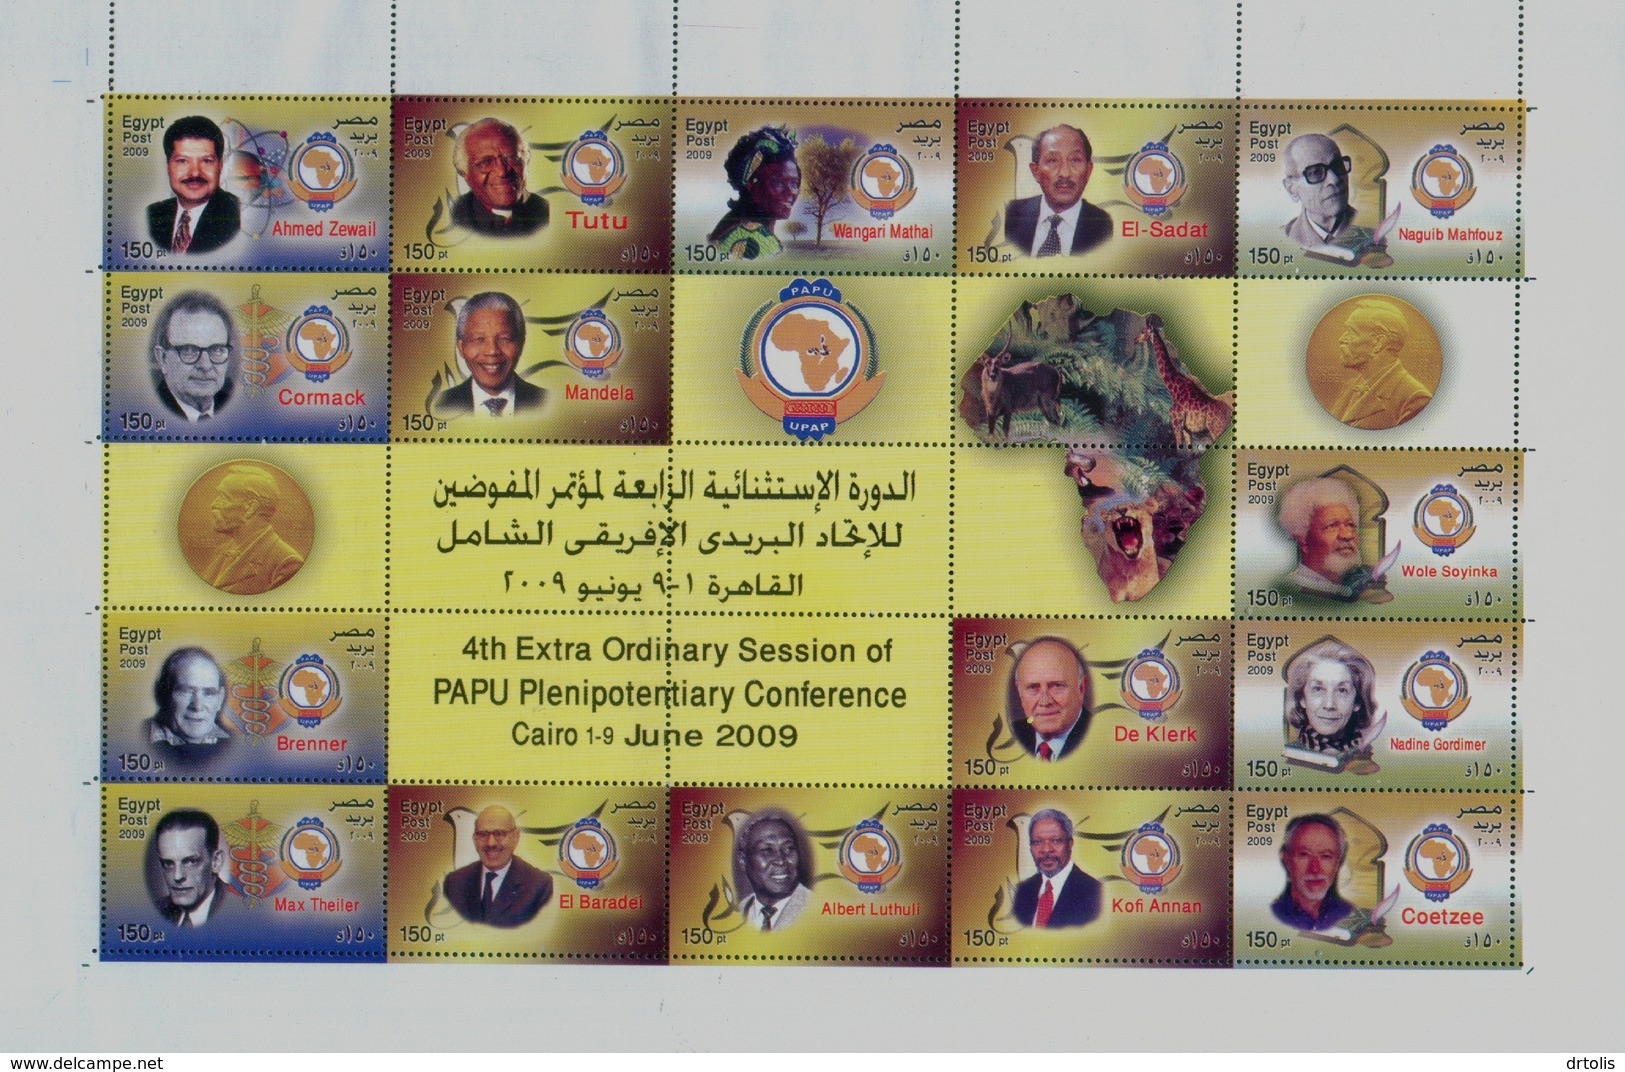 EGYPT / 2009 / COMPLETE YEAR ISSUES / MNH / VF / 7 SCANS . - Ungebraucht